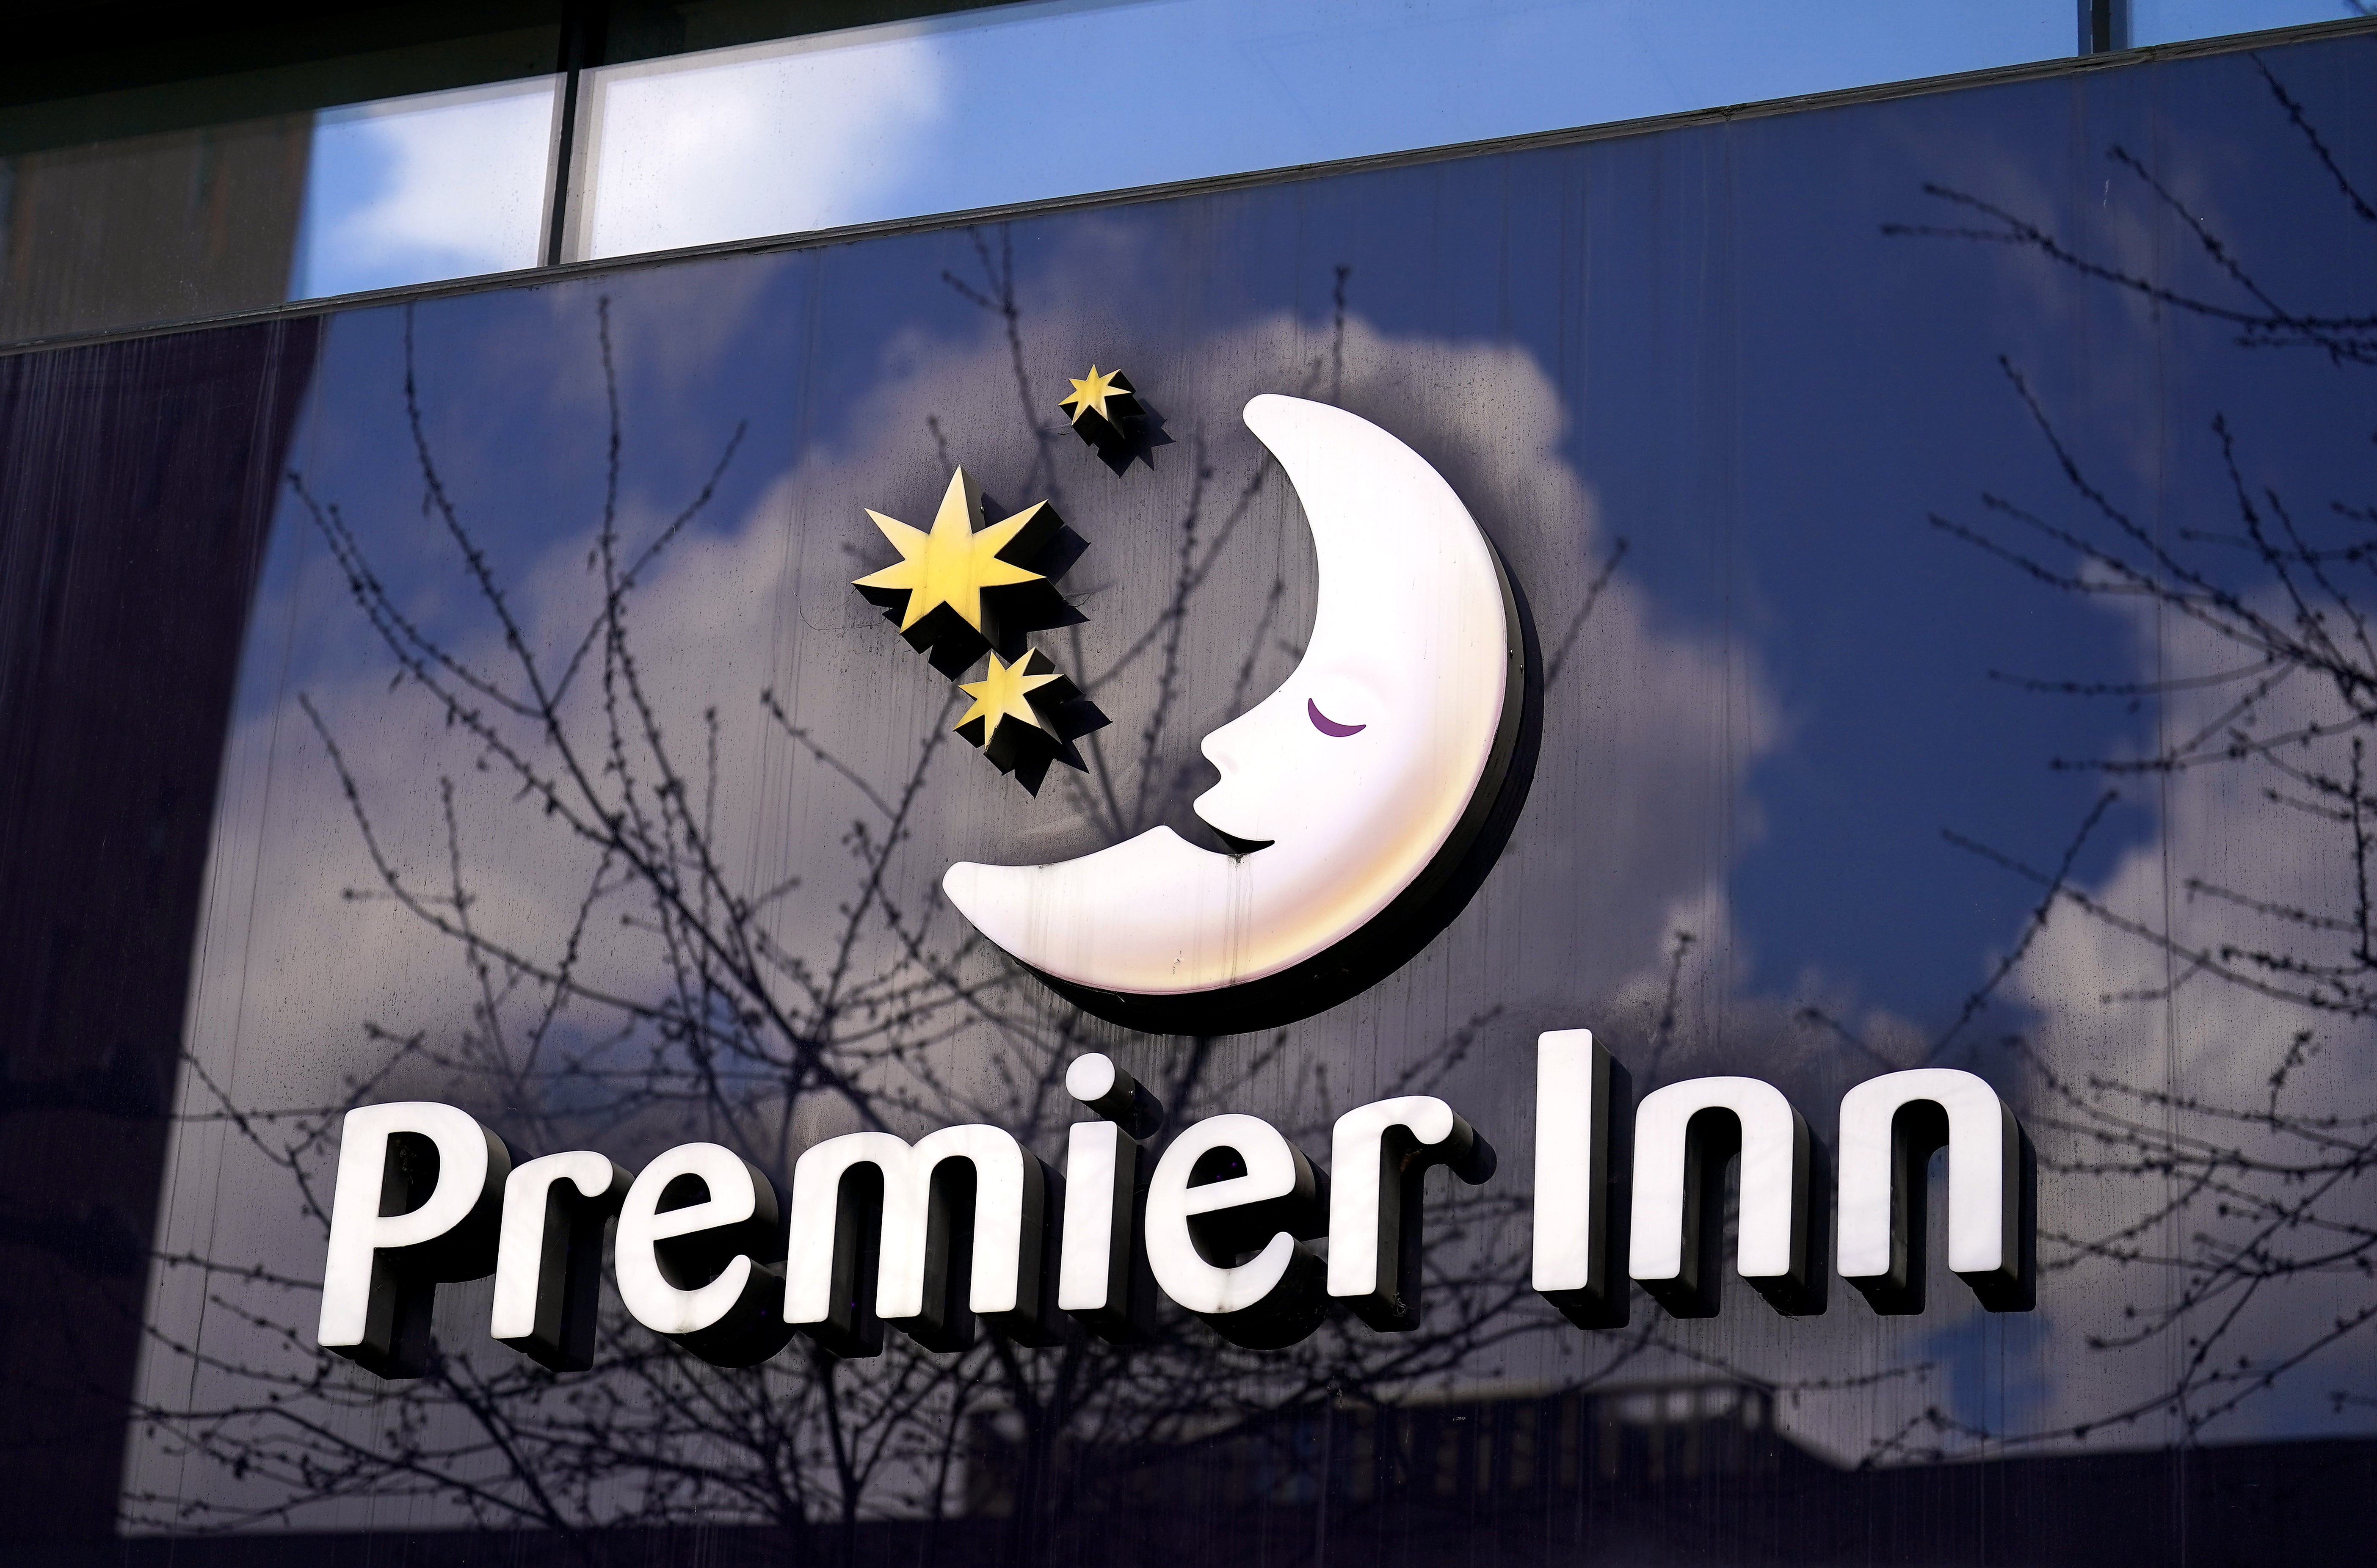 Premier Inn hopes to make £140 million in cost savings by 2025 (Mike Egerton/PA)